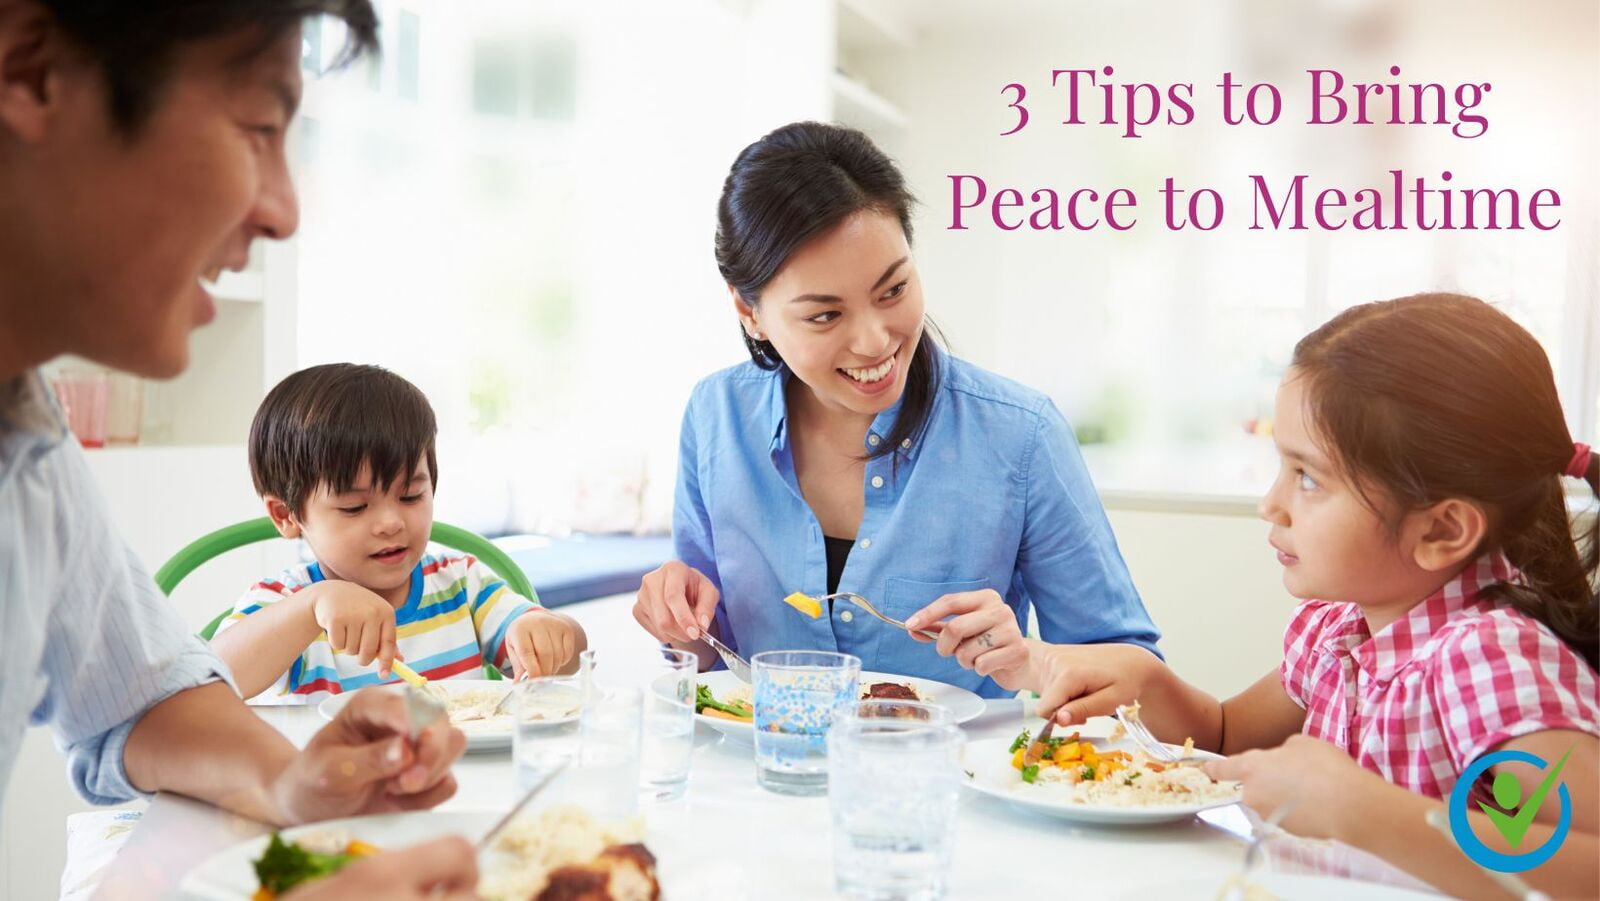 3 Tips to Bring Peace to Mealtime